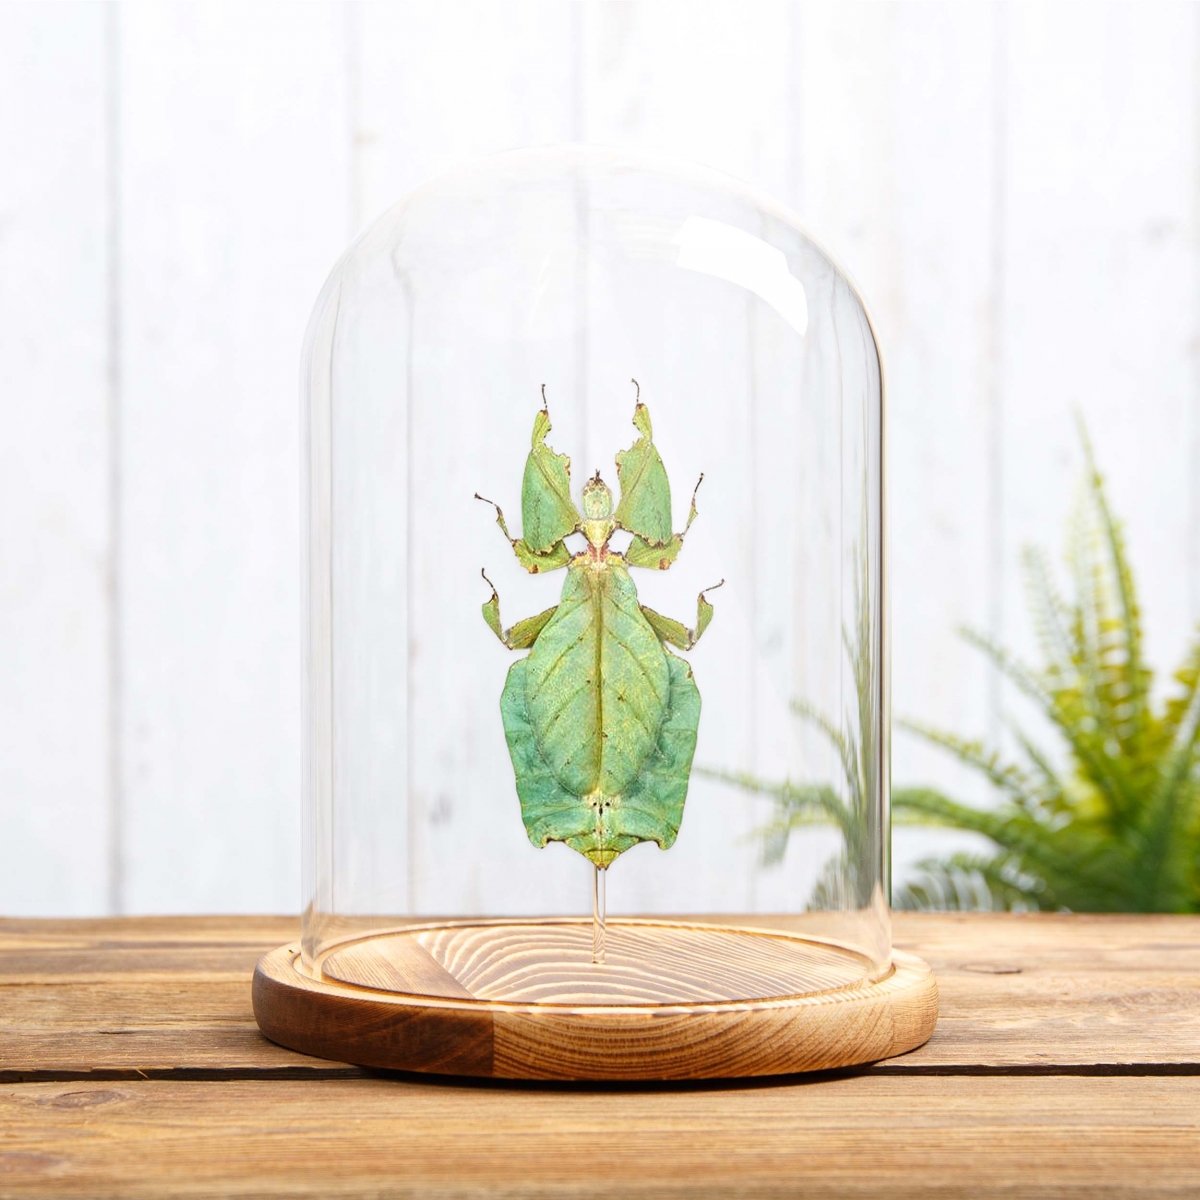 Giant Leaf Insect in Glass Dome with Wooden Base (Phyllium giganteum)